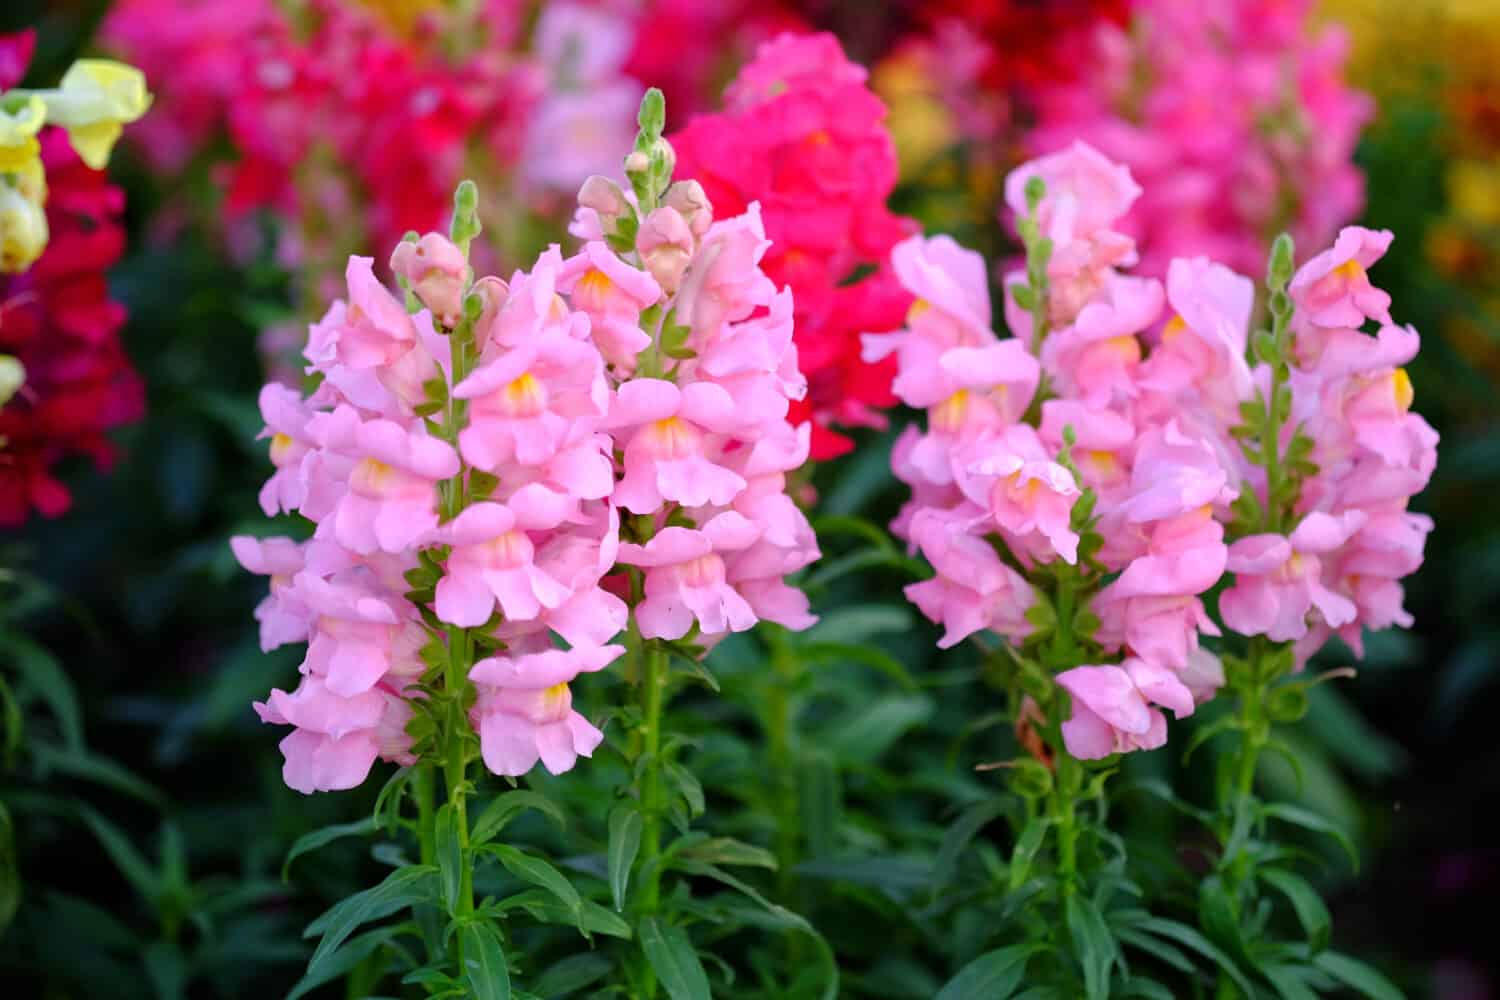 Ping flowers in the garden called Snapdragon or Antirrhinum majus or Bunny rabbits.